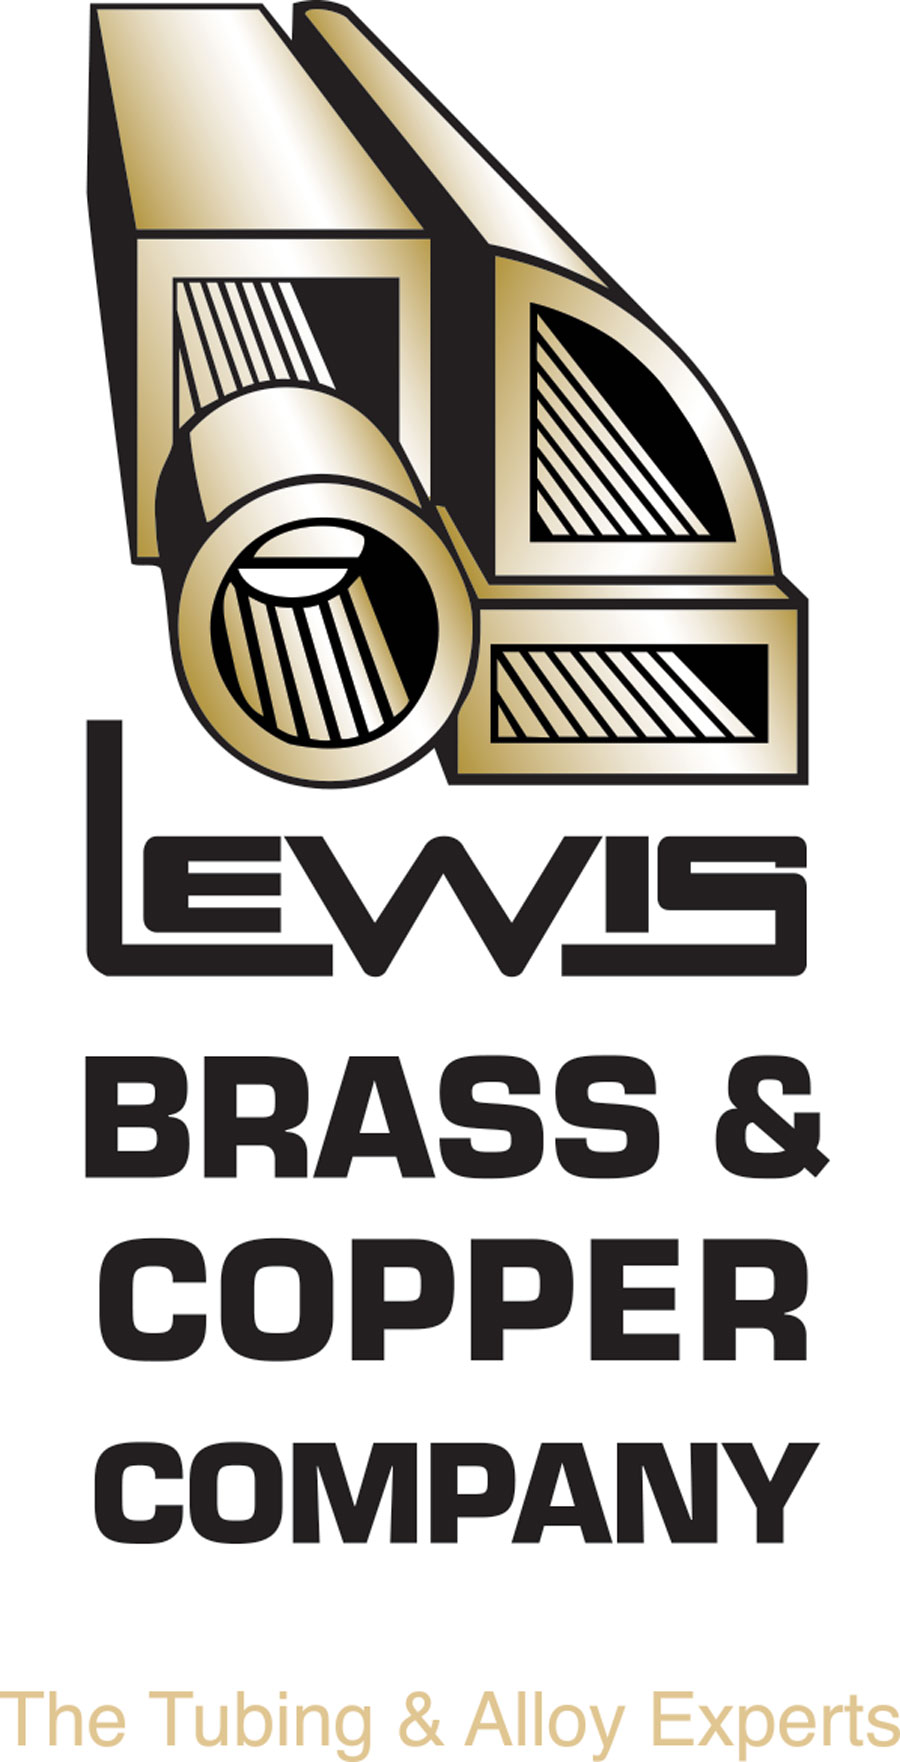 Lewis Brass & Copper Co.